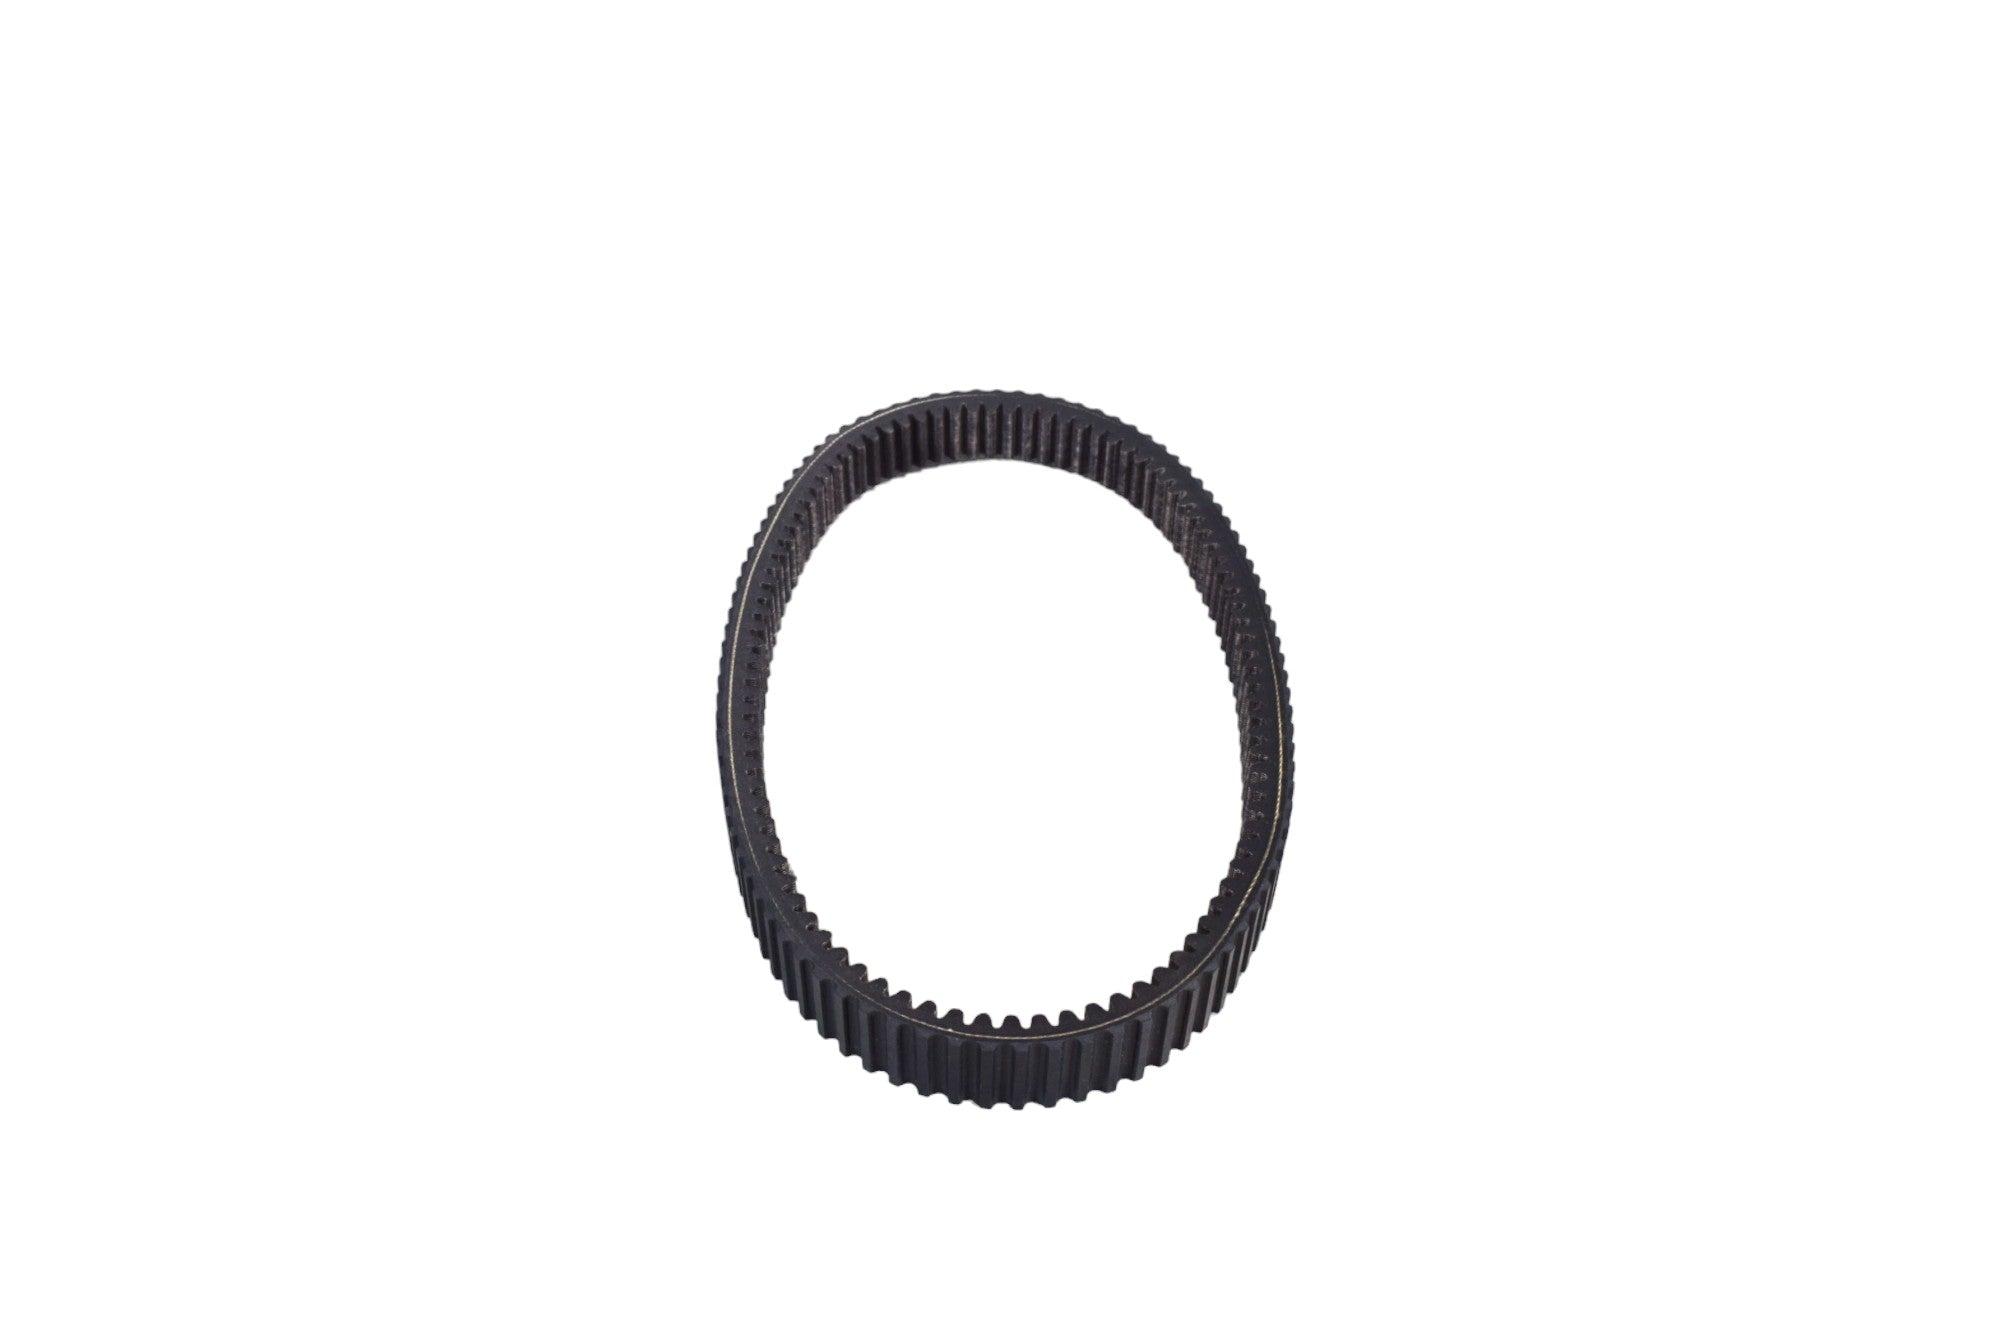 Ultimax UXP438 Drive Belt for Kawasaki KRT and Rhino OEM Replacement for 59011-0043, 5B4-17641-00-00 (Made in USA)